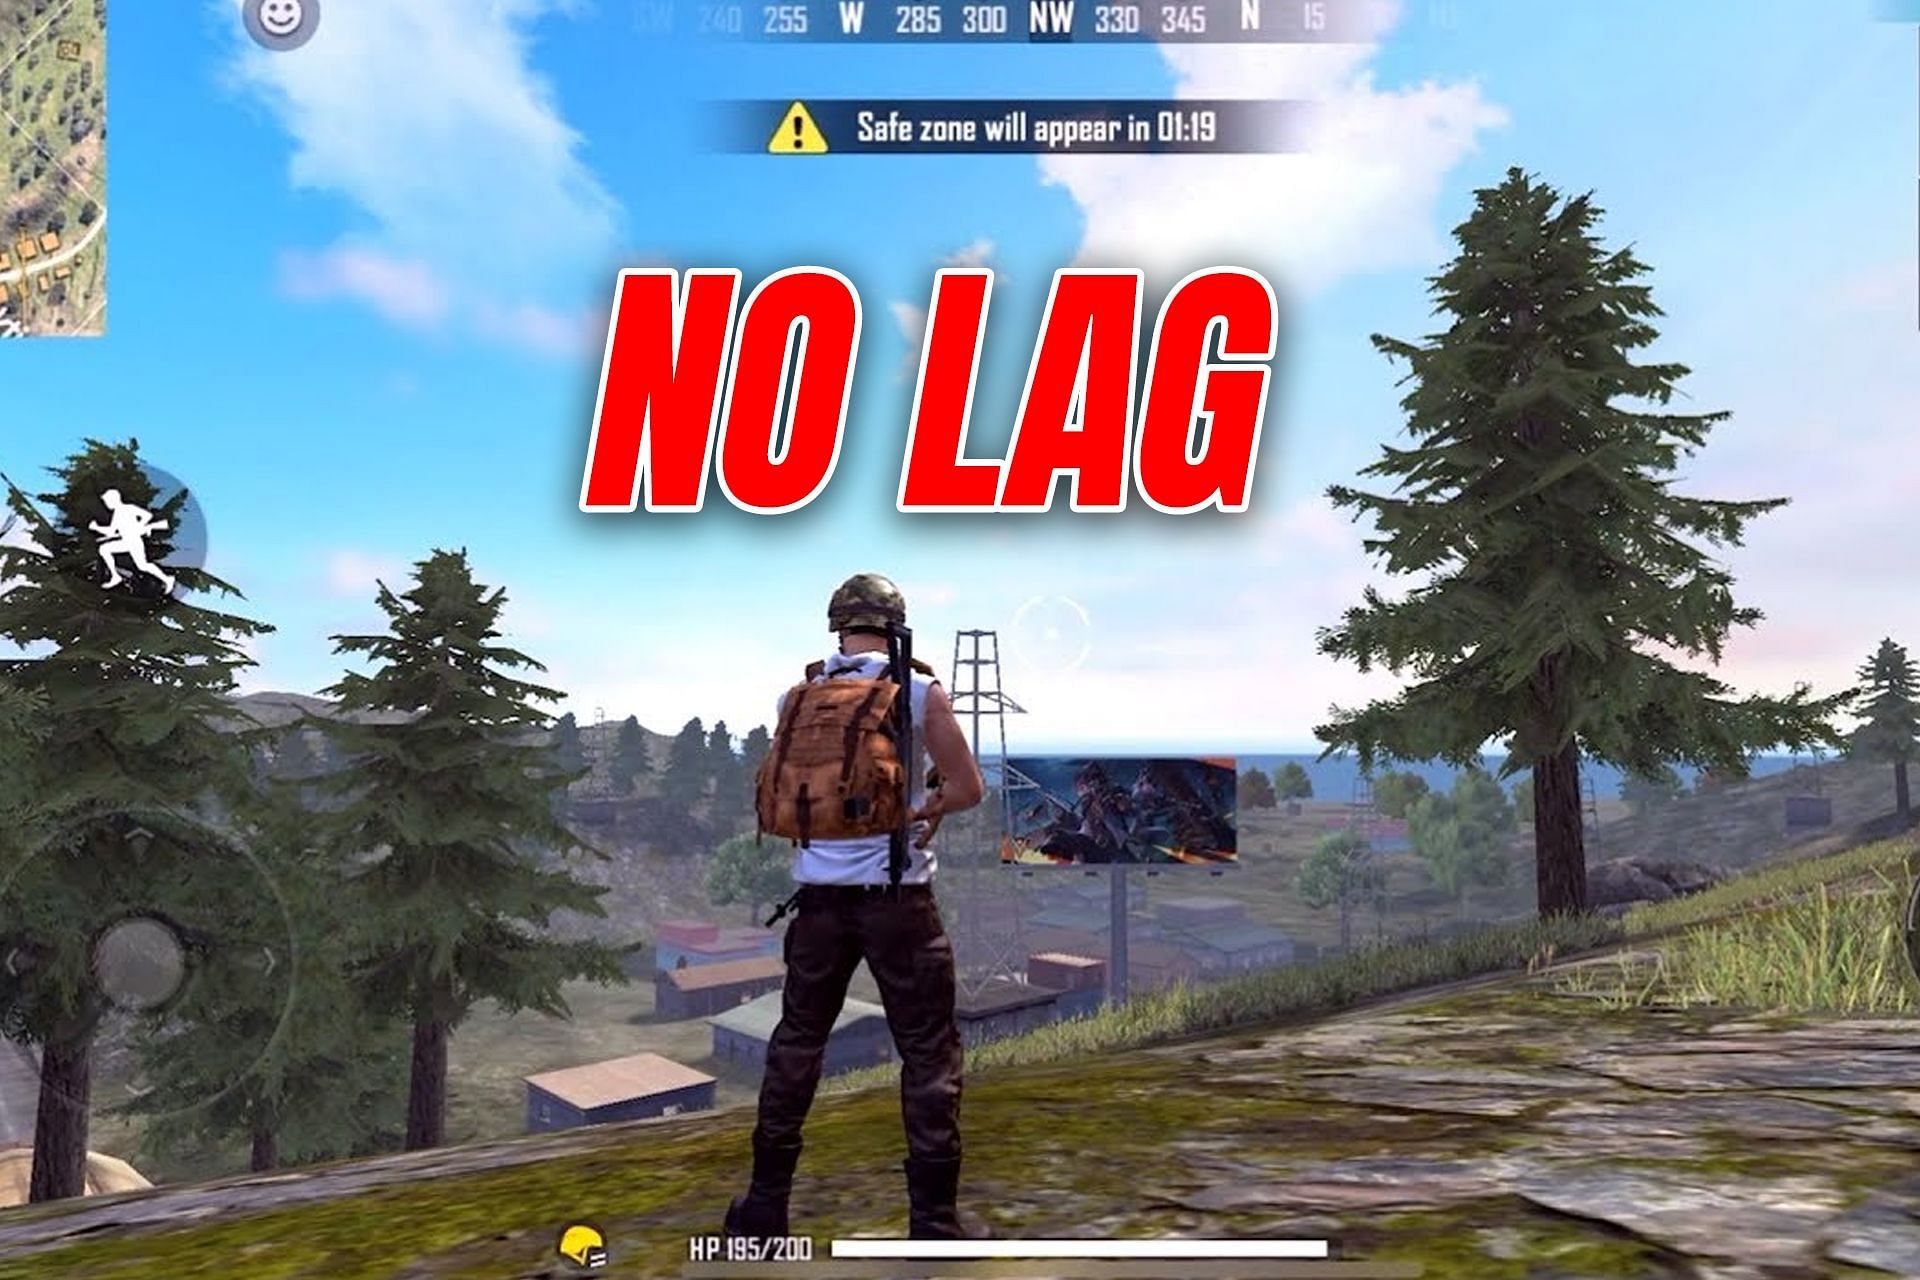 Why Free Fire MAX players should not use GFX tool